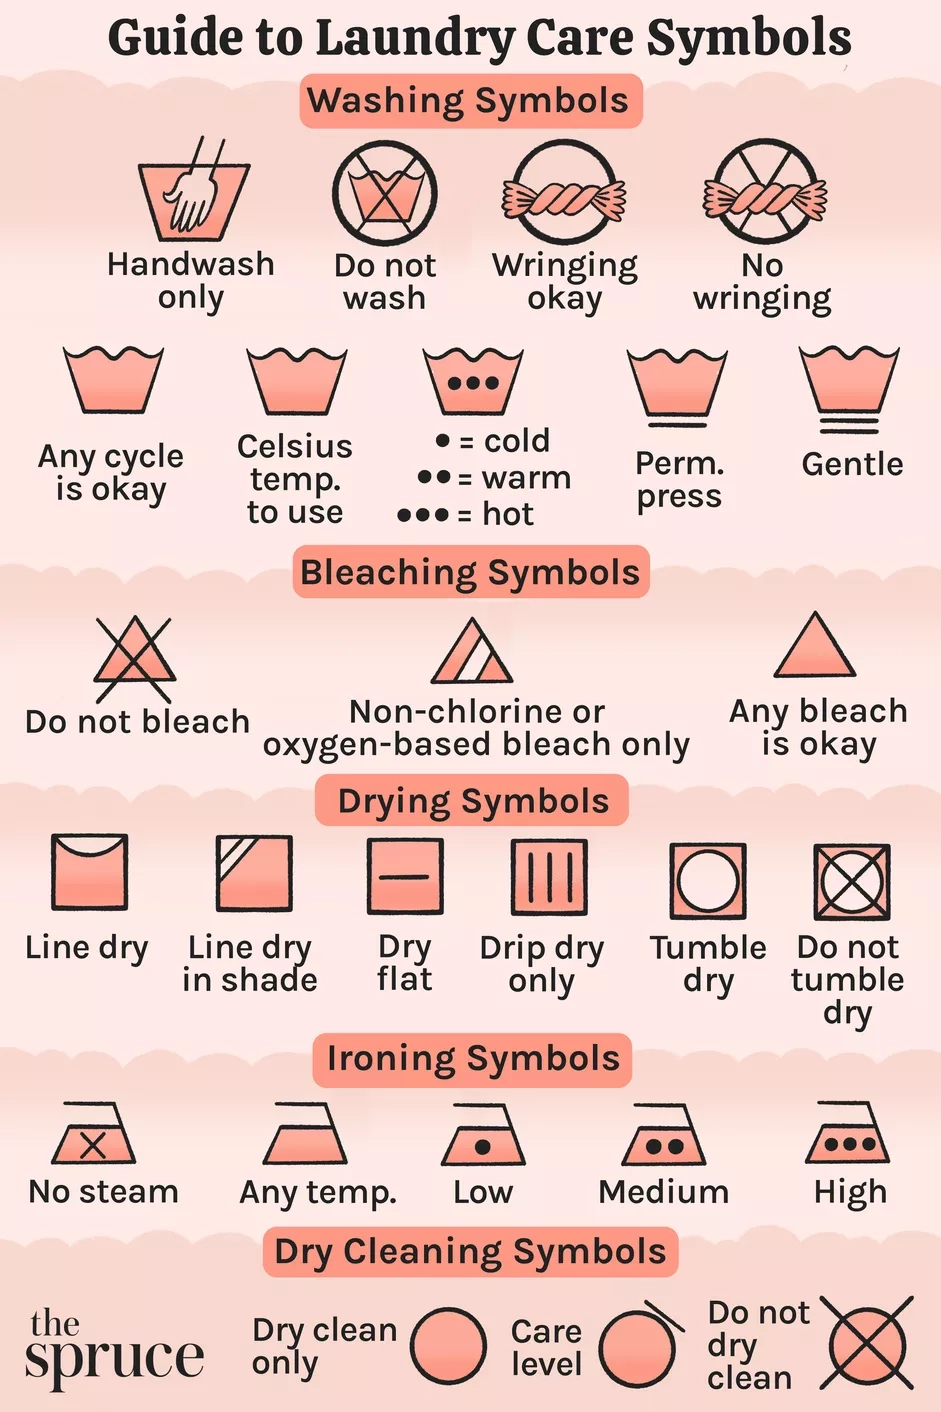 guide-to-laundry-care-symbols